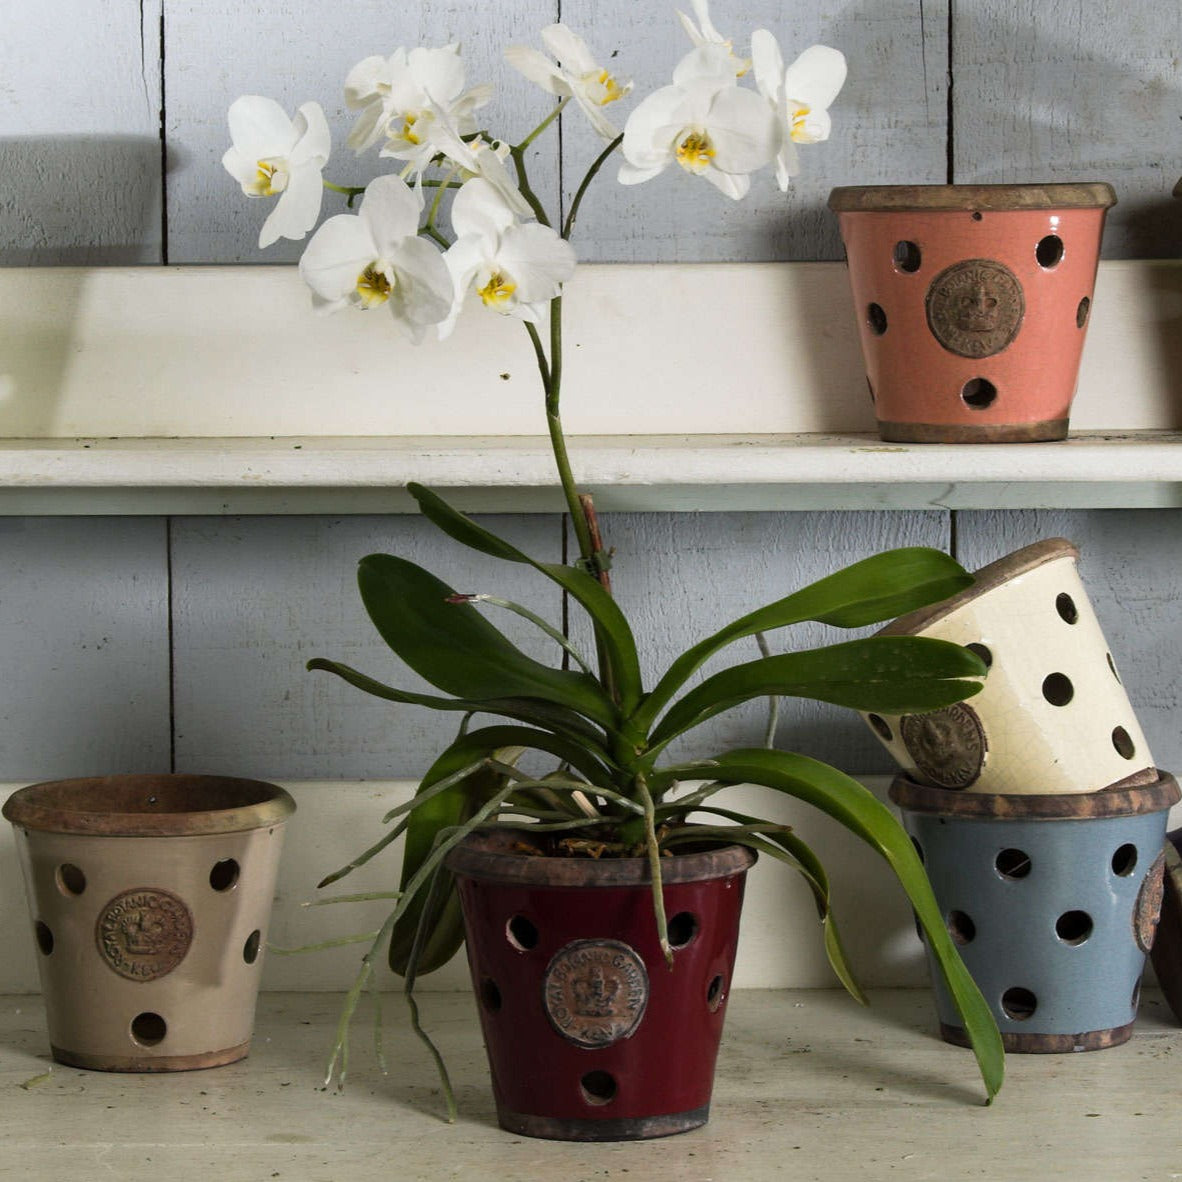 Orchid Pots in several colors and the red one planted with a beautiful white orchid.